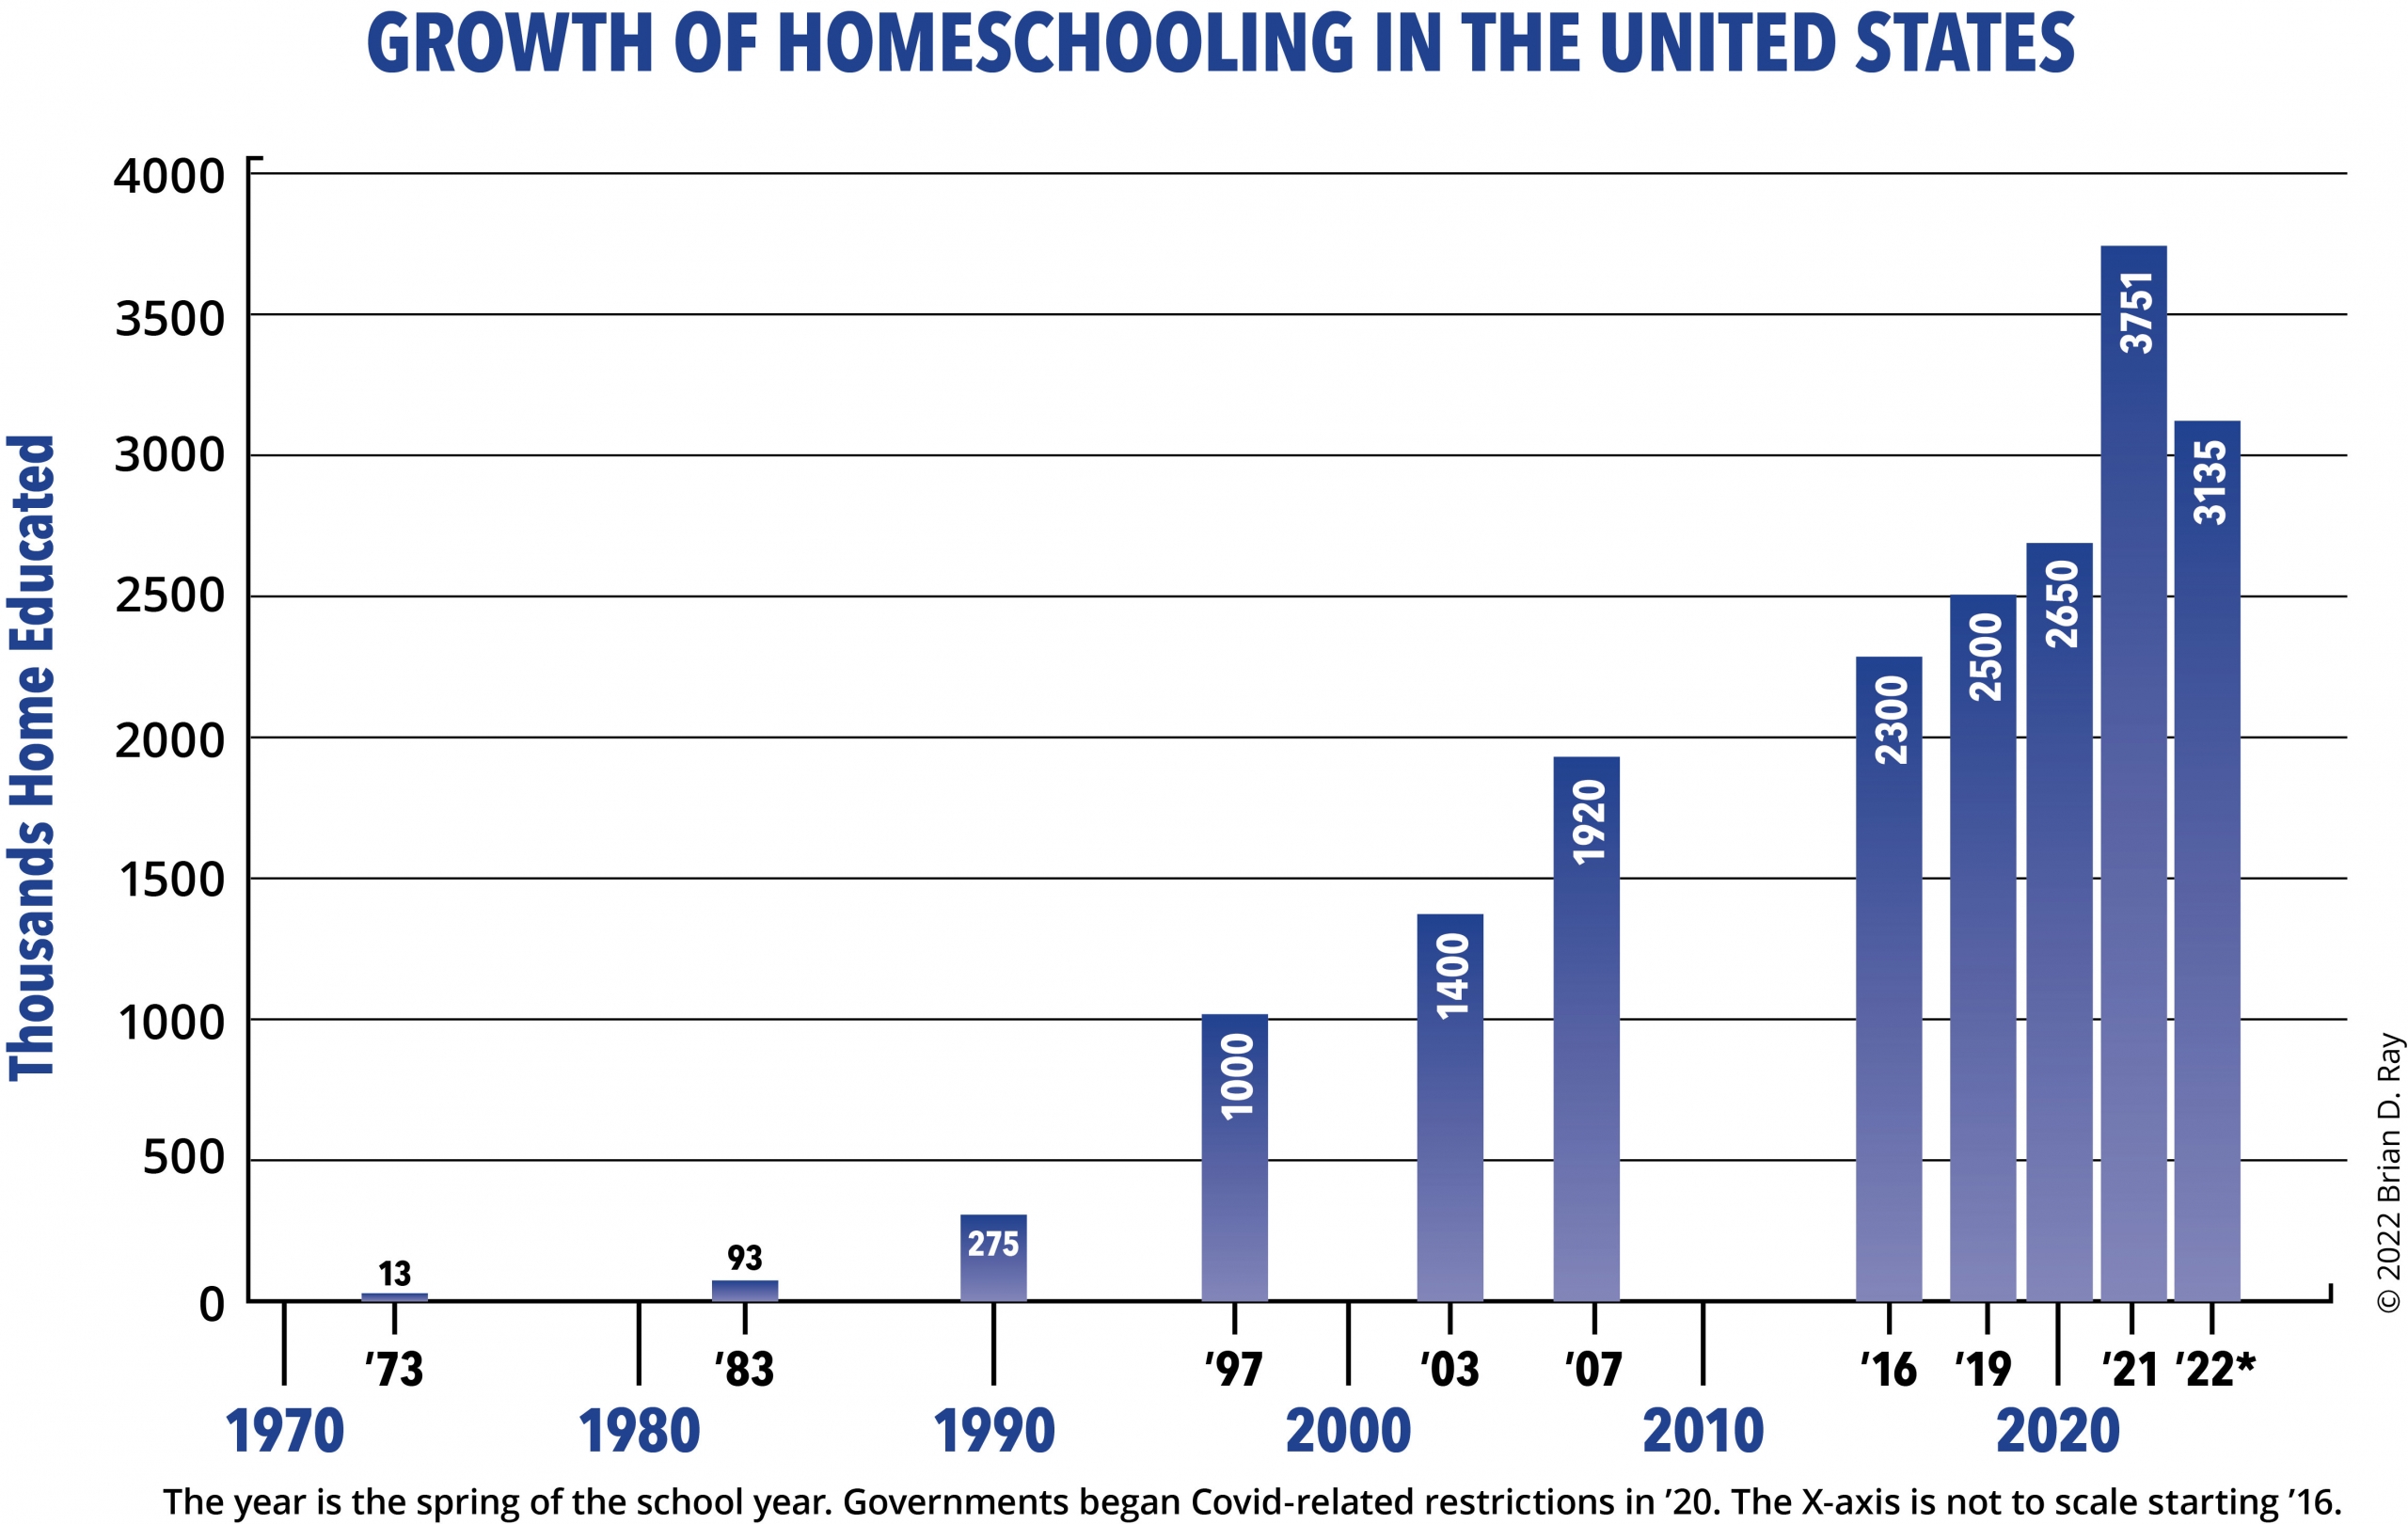 How Many Homeschool Students are there in the United States during the